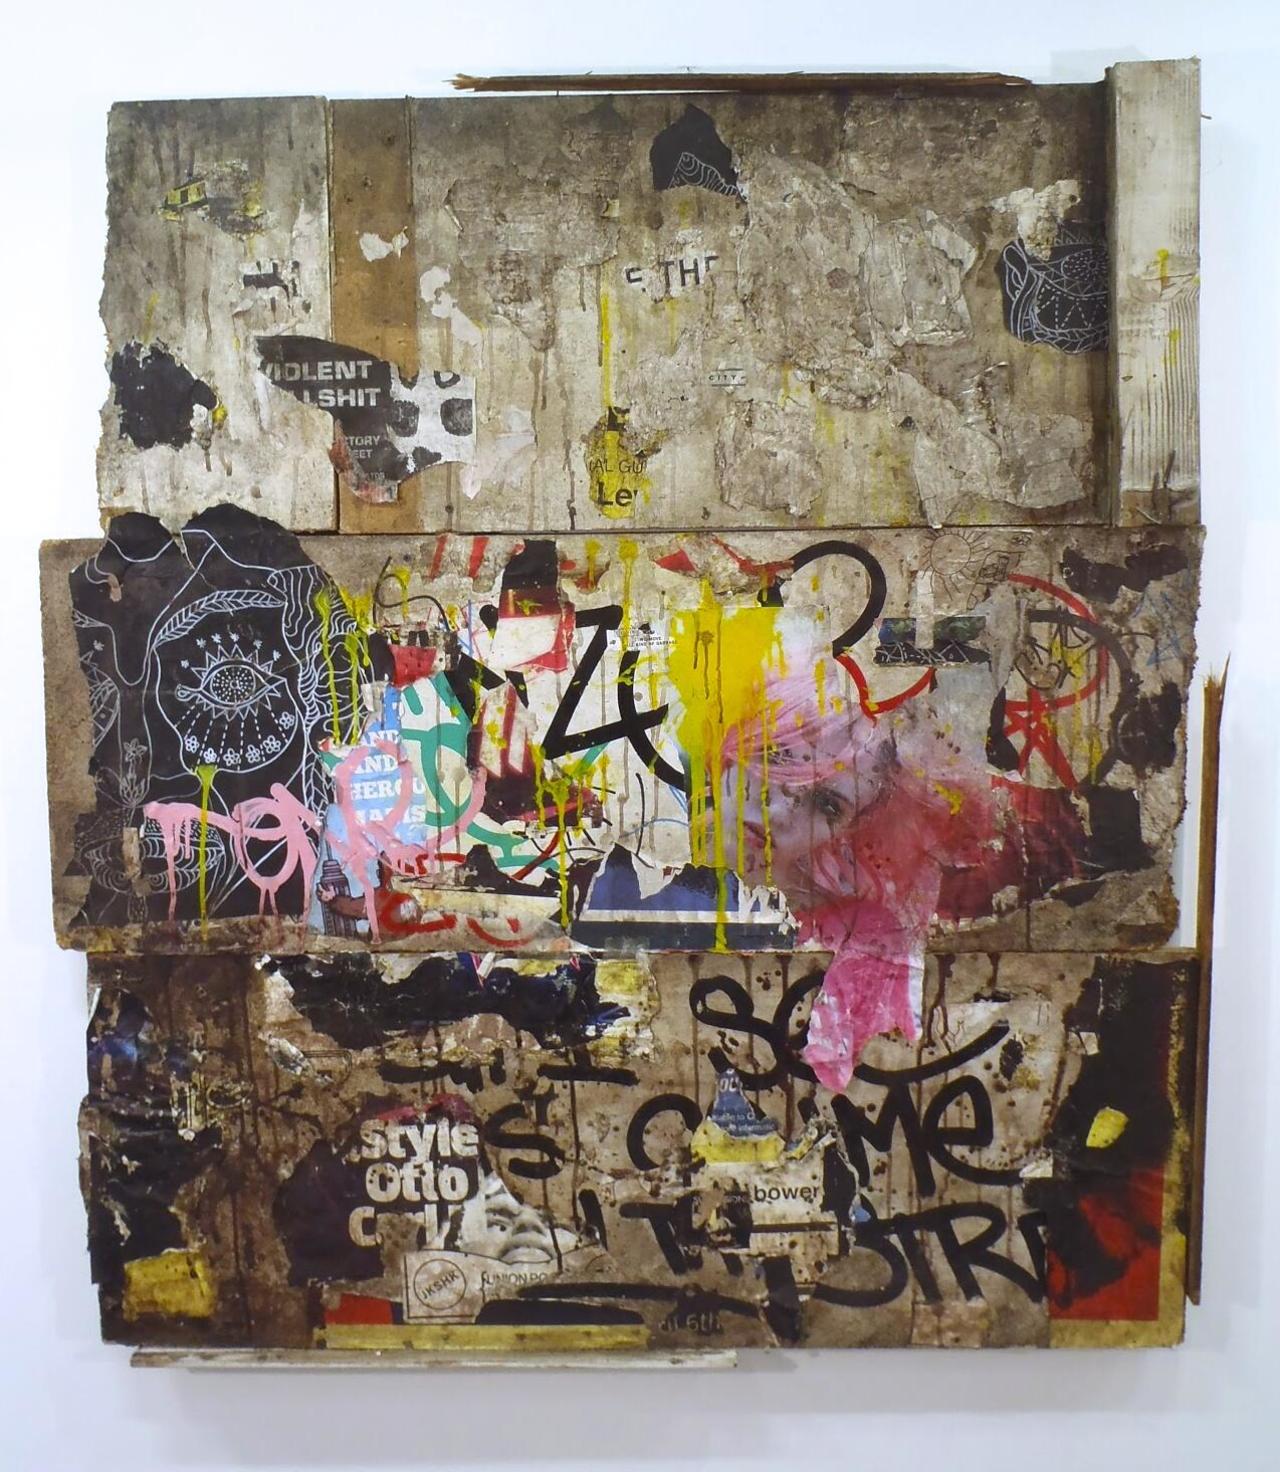 RT @StuartLantry: Check out this older painting- "Williamsburg, 11213" #art #painting #graffiti #collage #streetart http://t.co/wKA03UIuLl